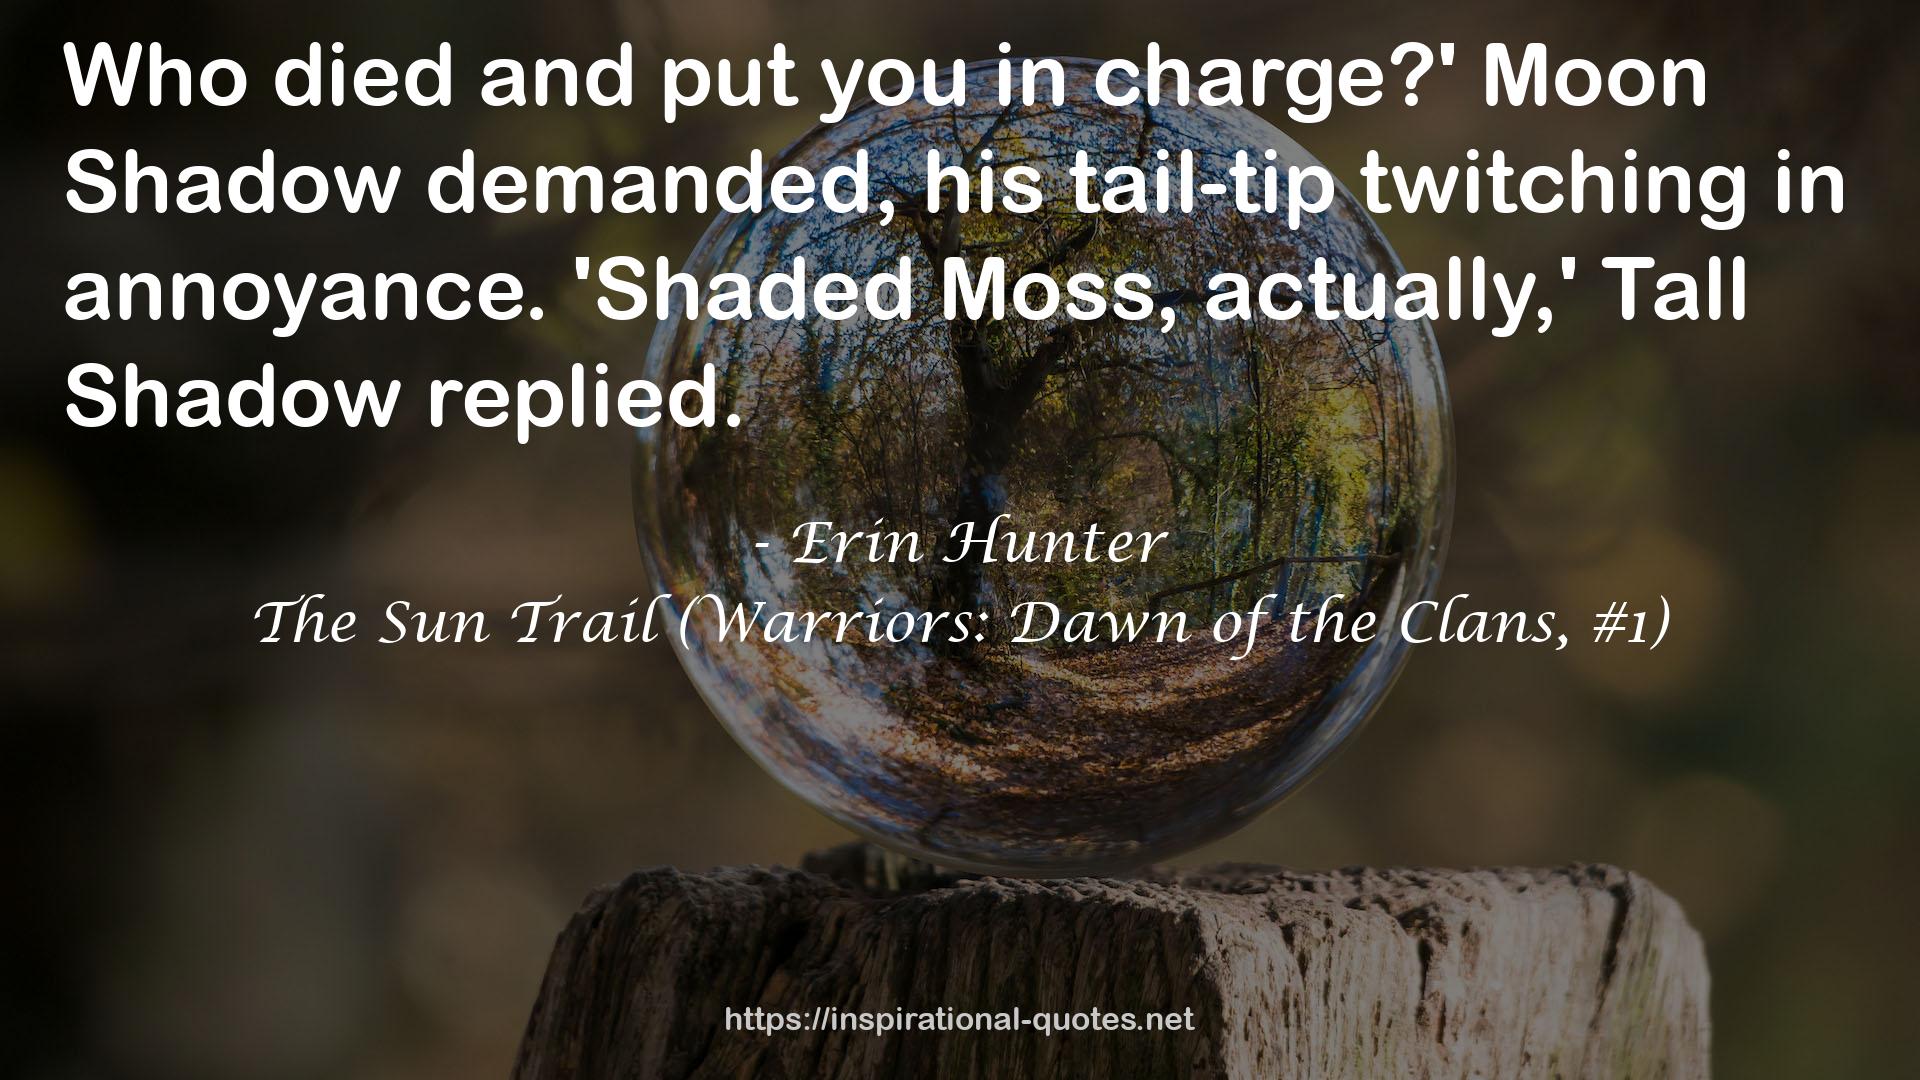 The Sun Trail (Warriors: Dawn of the Clans, #1) QUOTES